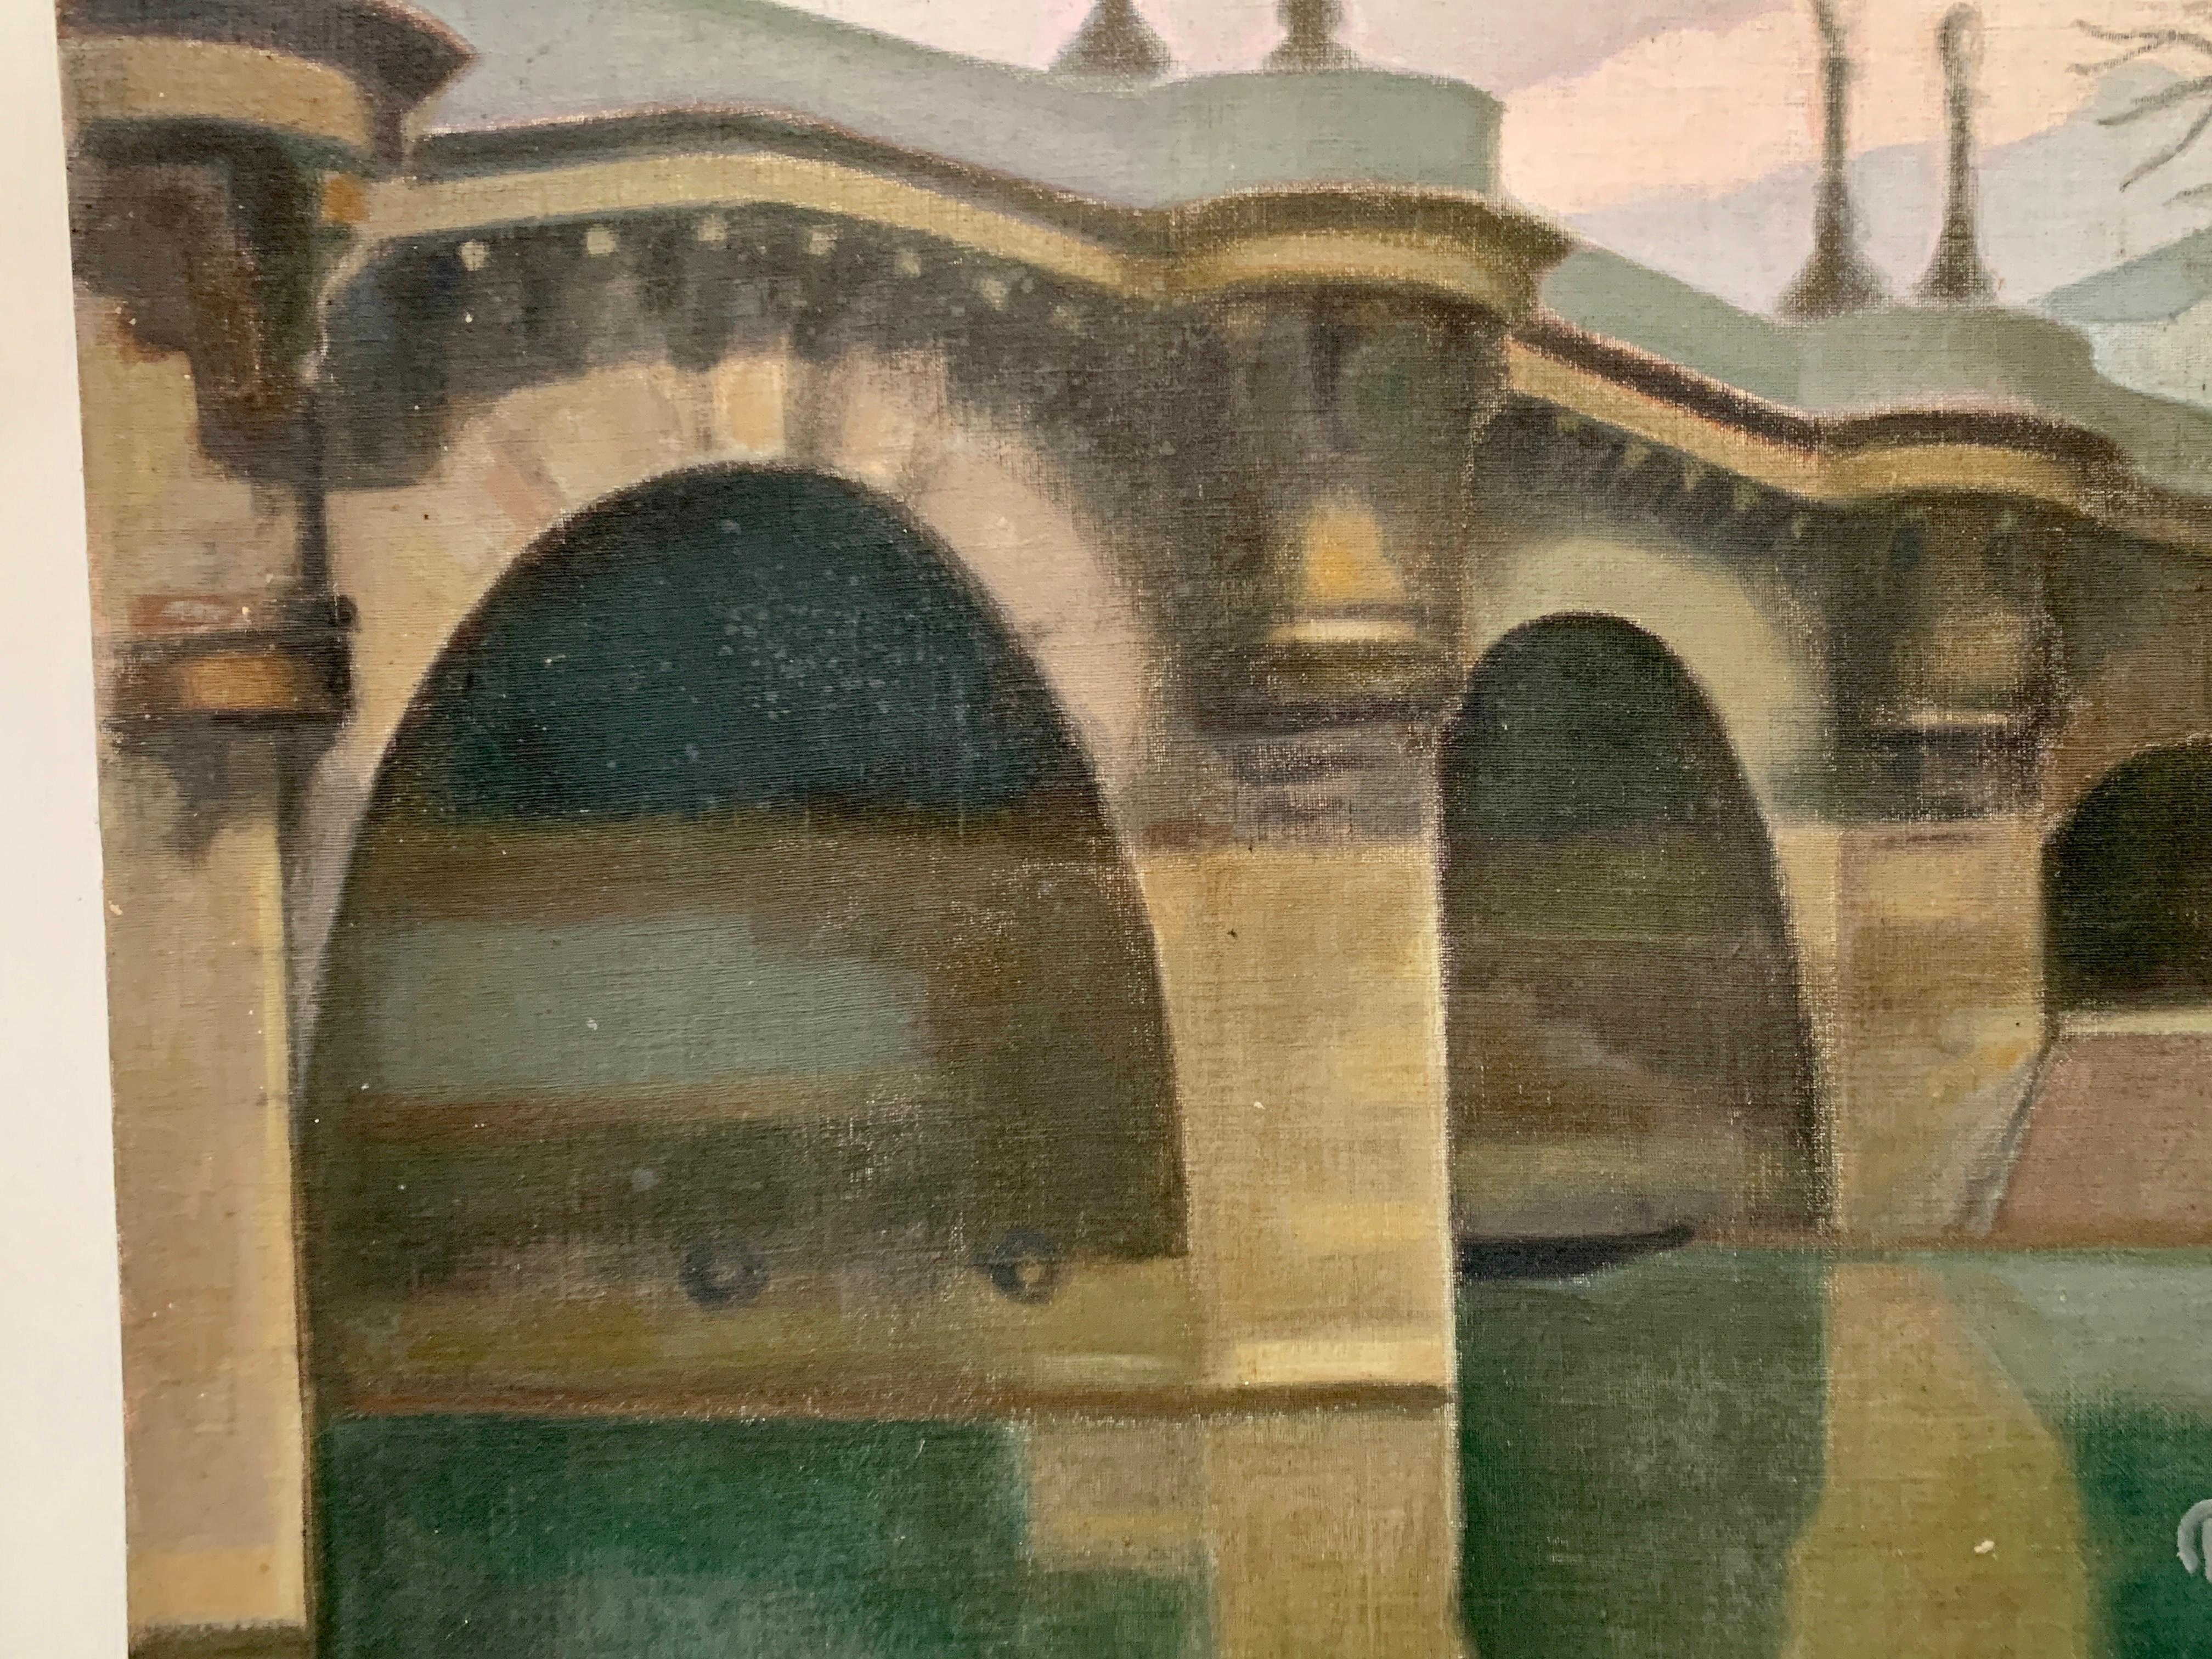 Mid 20th century Impressionist,  A Bridge on the Seine in Paris, Le Pony Neuf - Painting by R.Debray